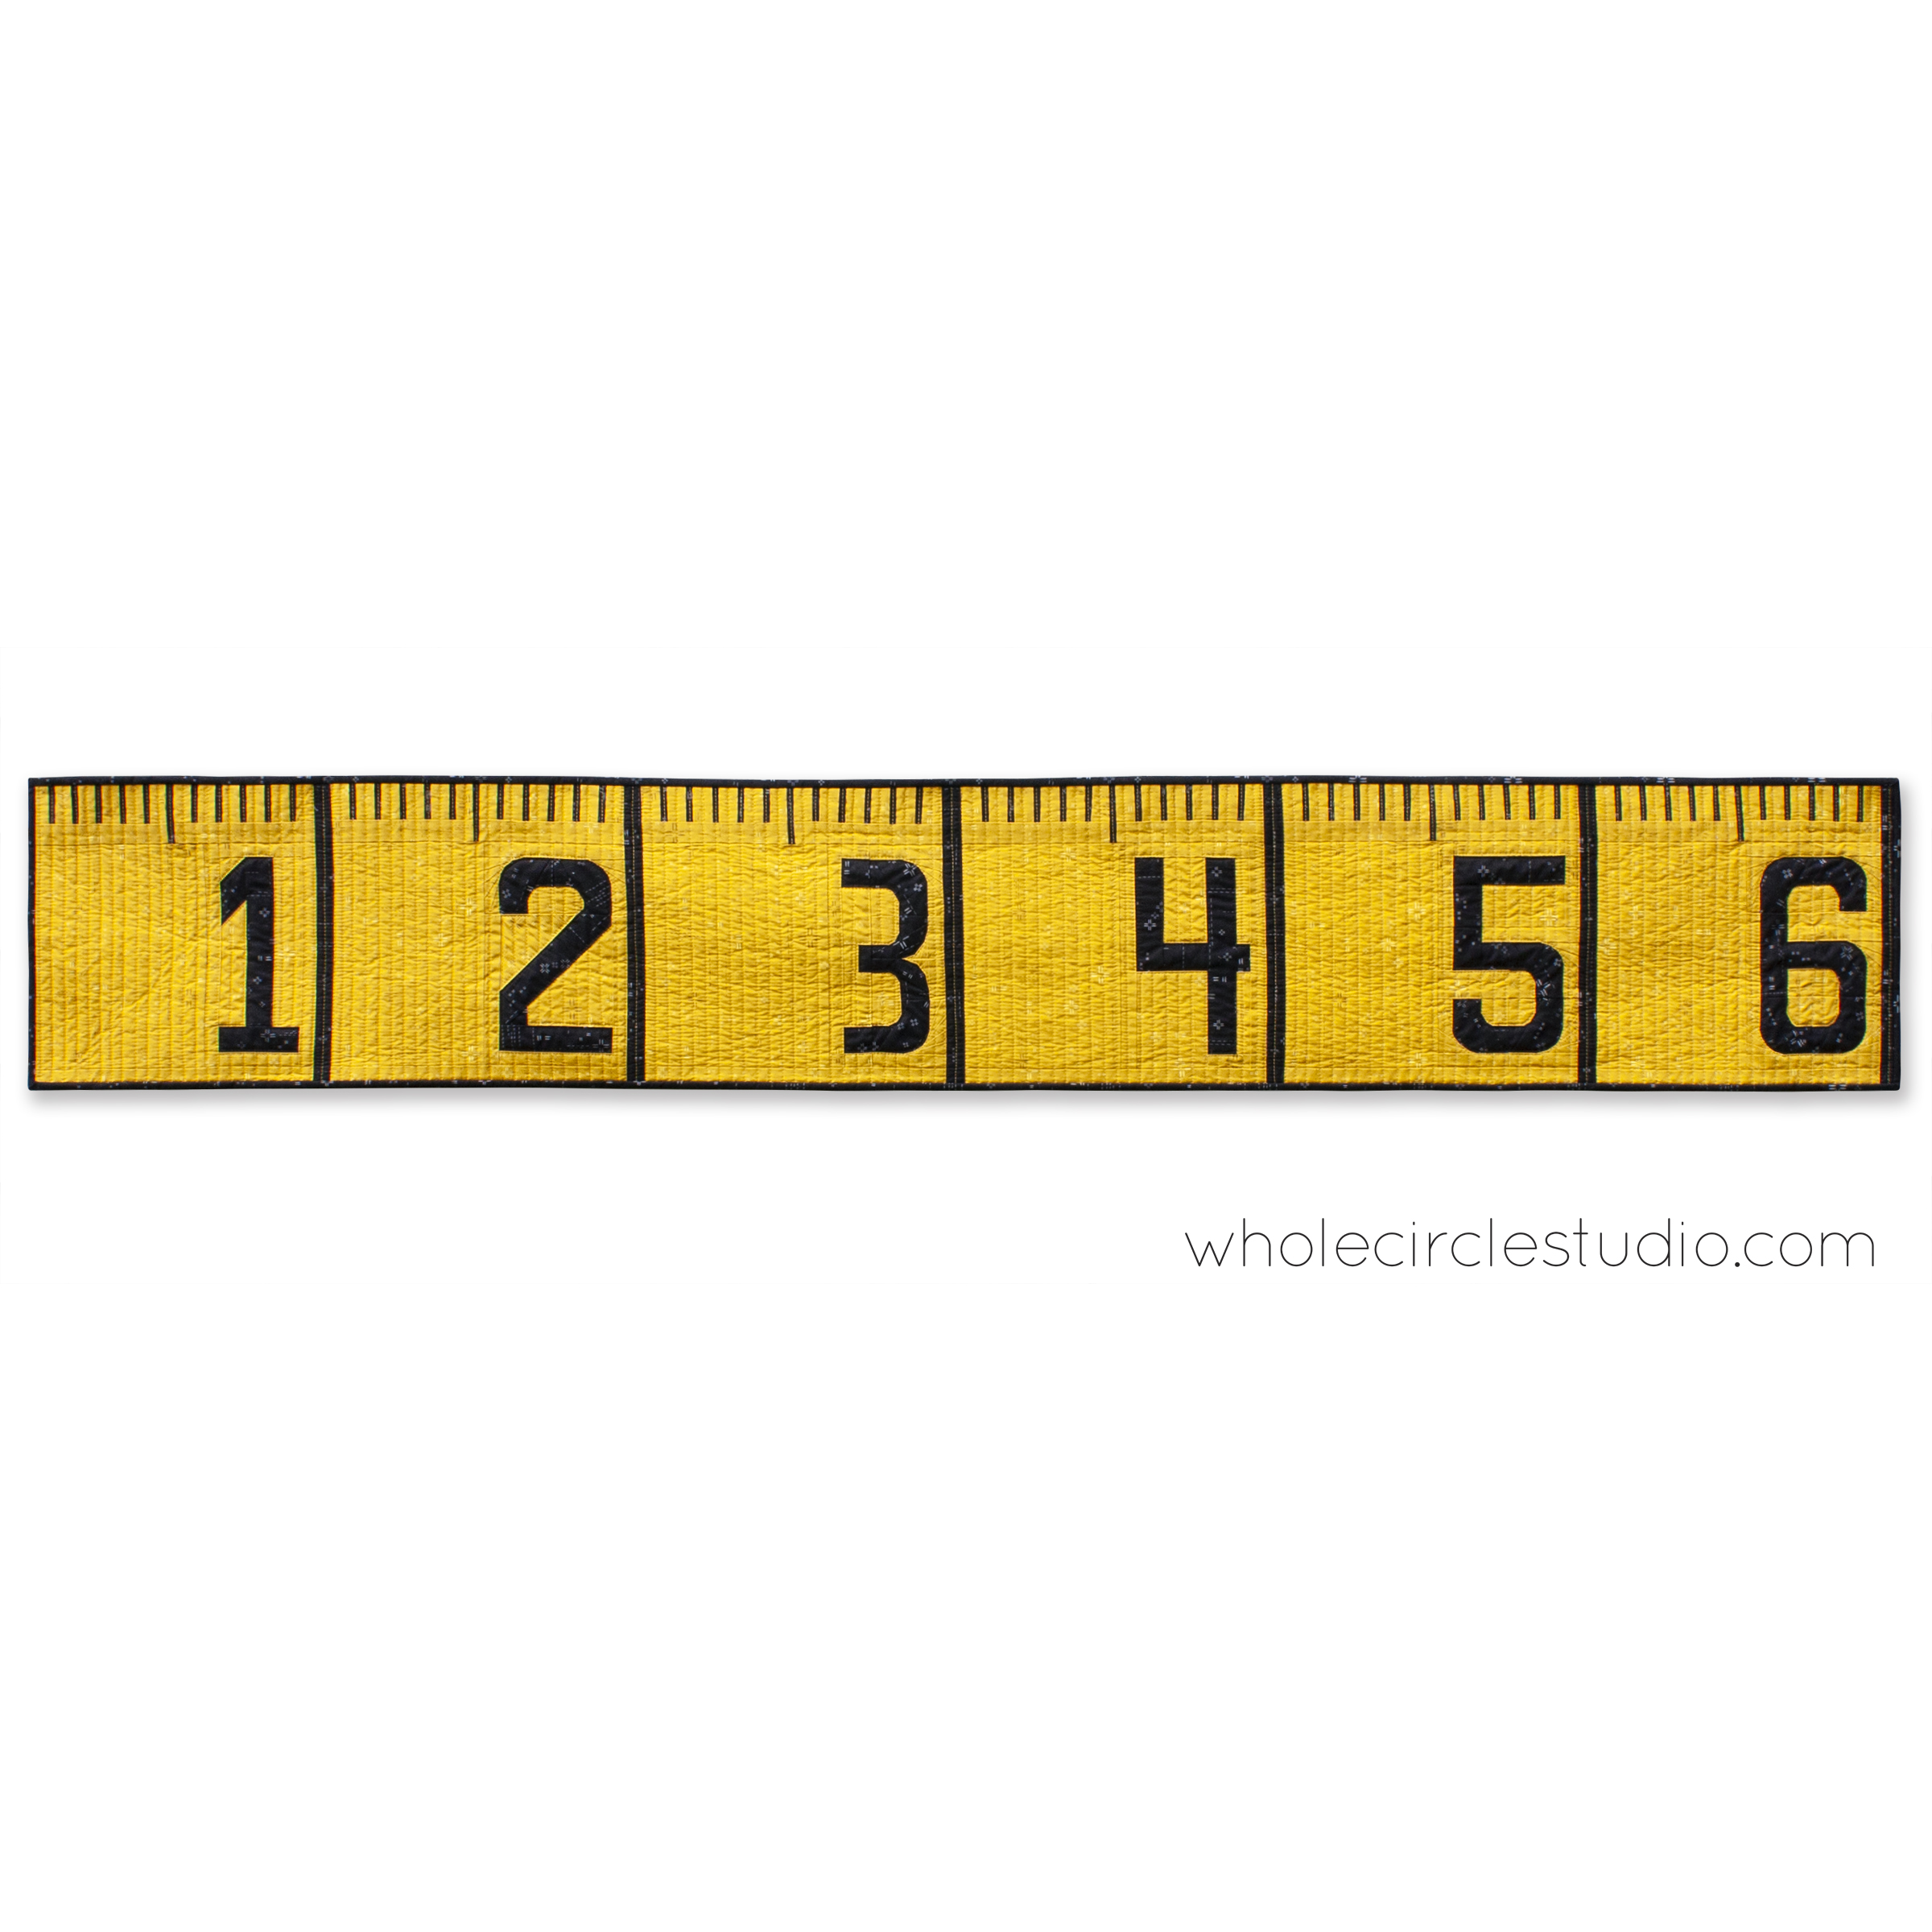 A Foot Ruler Cheaper Than Retail Price Buy Clothing Accessories And